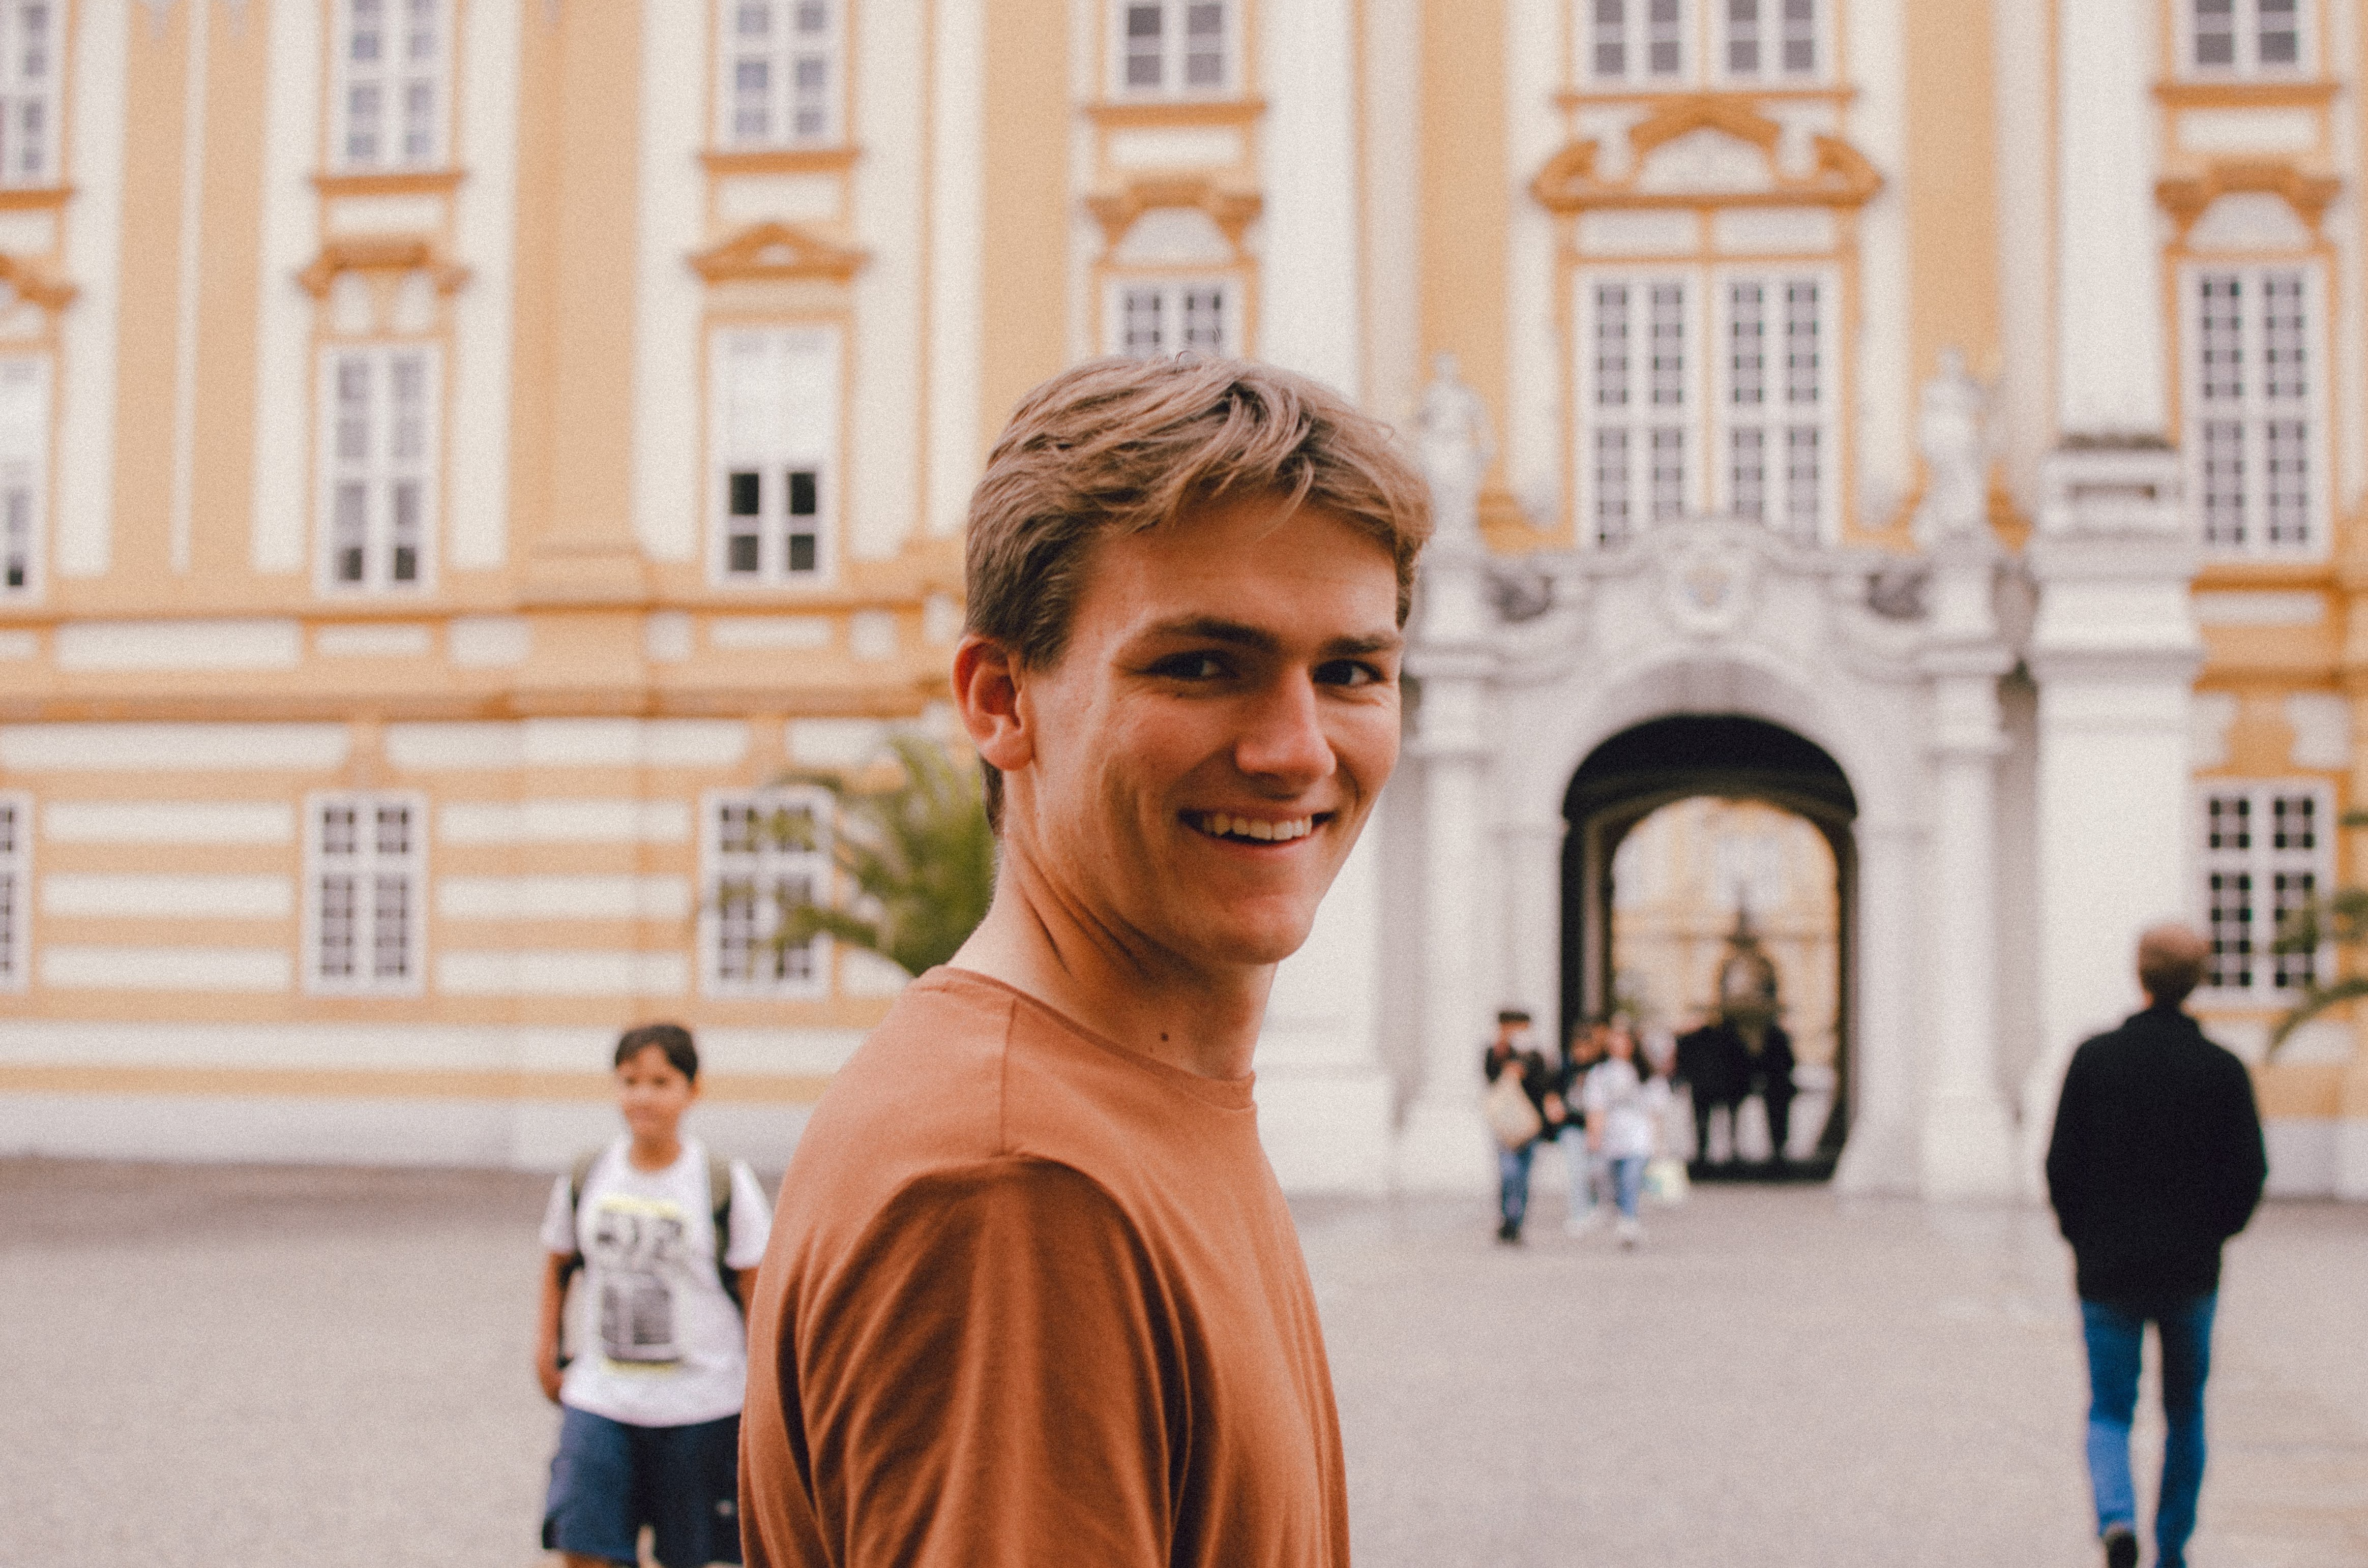 Dordt student smiles at the camera while in a foreign country town